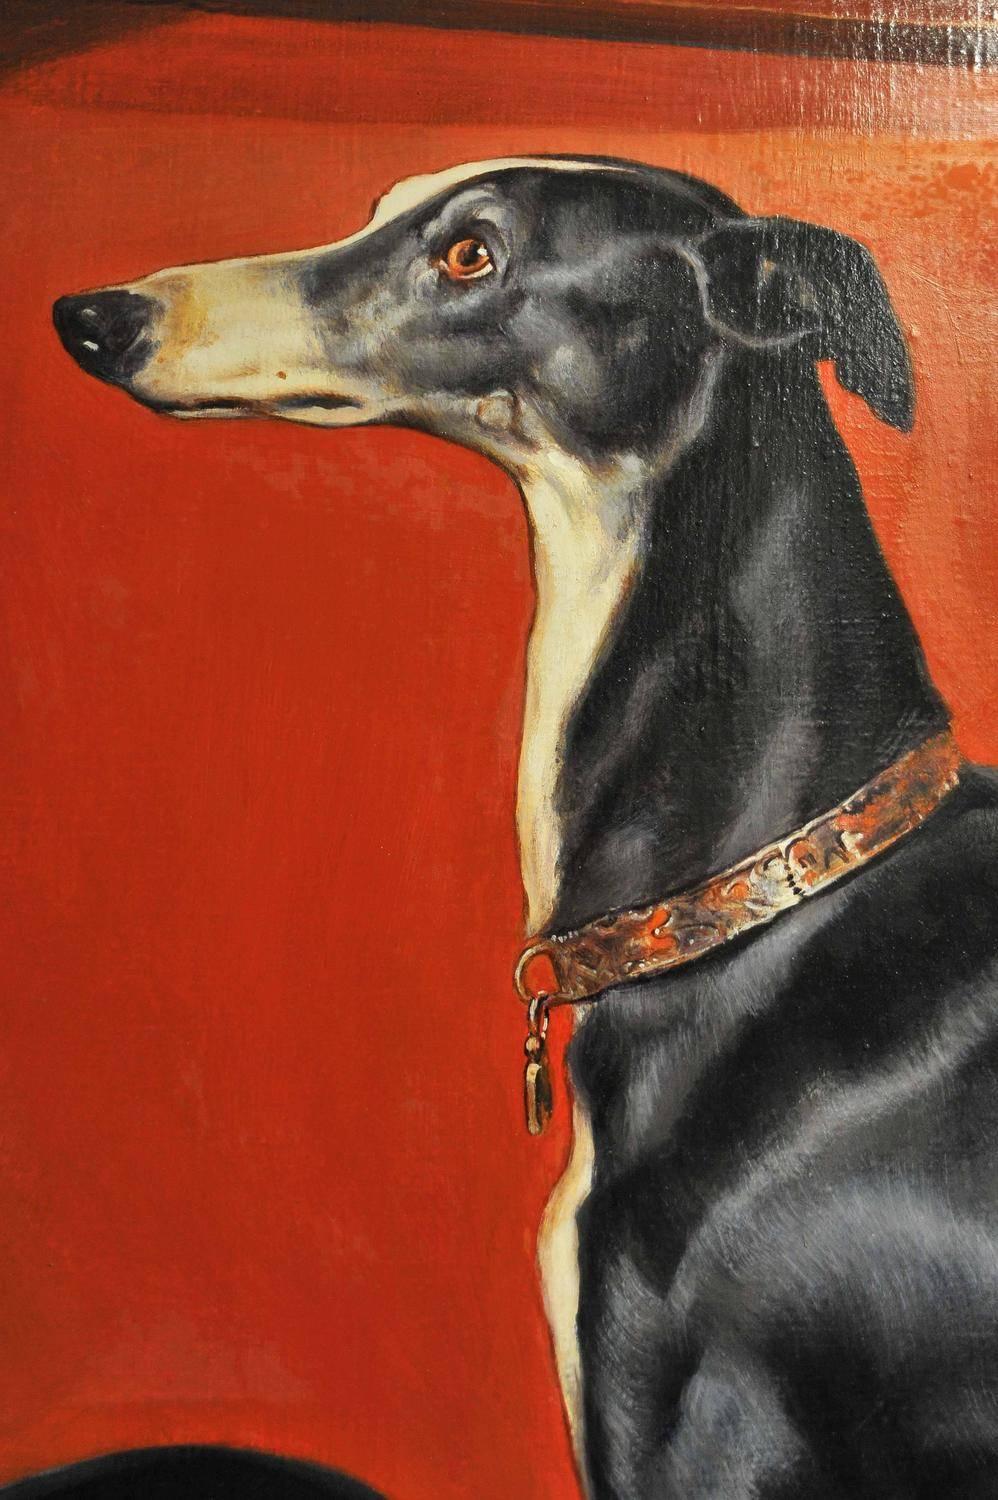 This lovely reproduction of Eos is after the original painting by Landseer, and is unsigned. The painting is very well executed and the artist has captured the greyhound’s expression beautifully. The original work was commissioned in 1841 by Queen